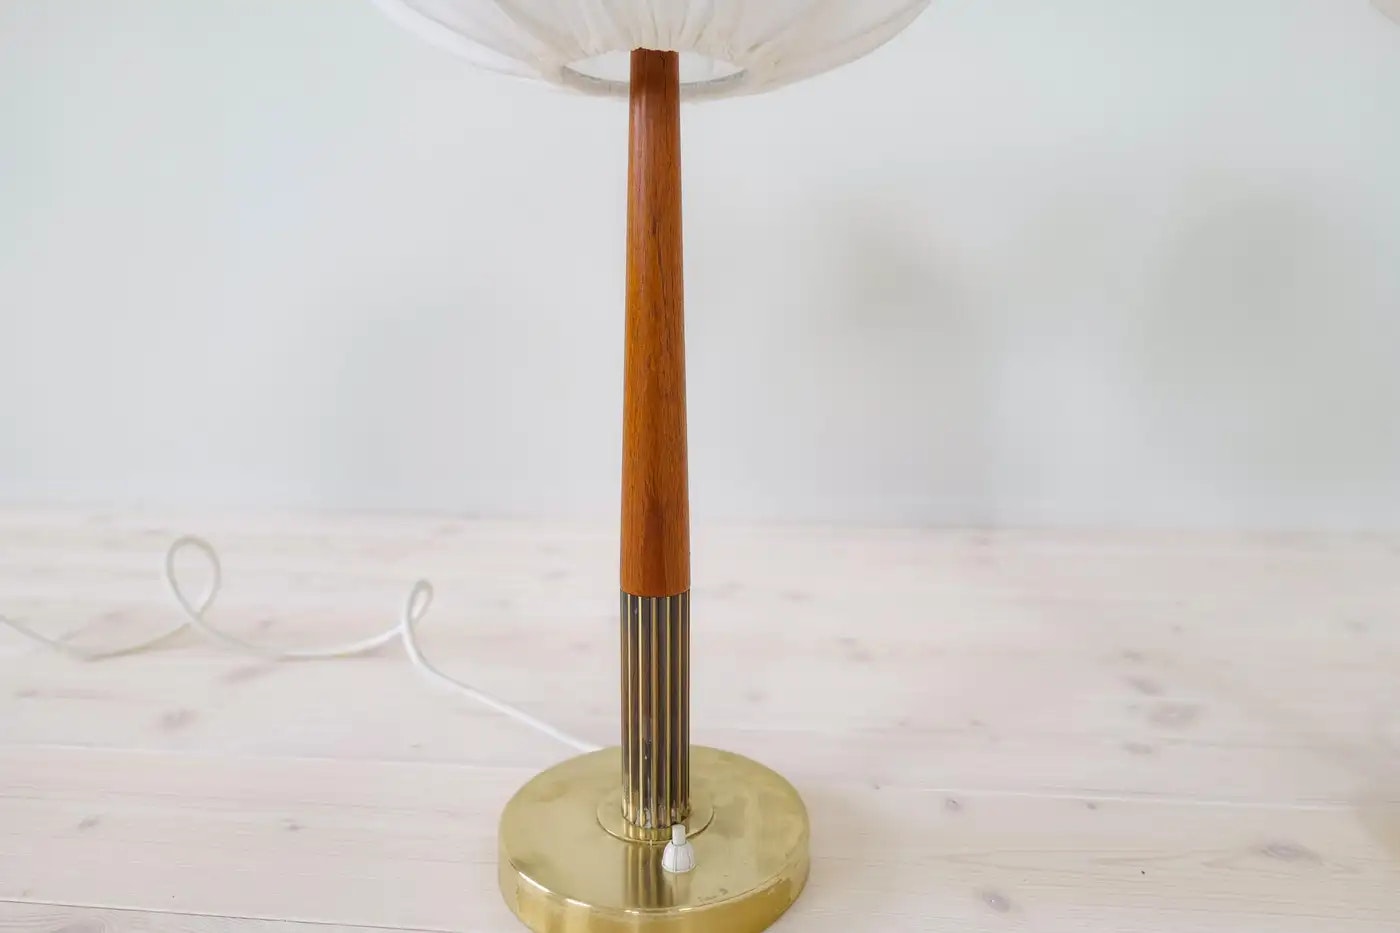 Swedish Midcentury Table Lamps in Brass, Teak and Cotton Shades "Boréns" 1960s